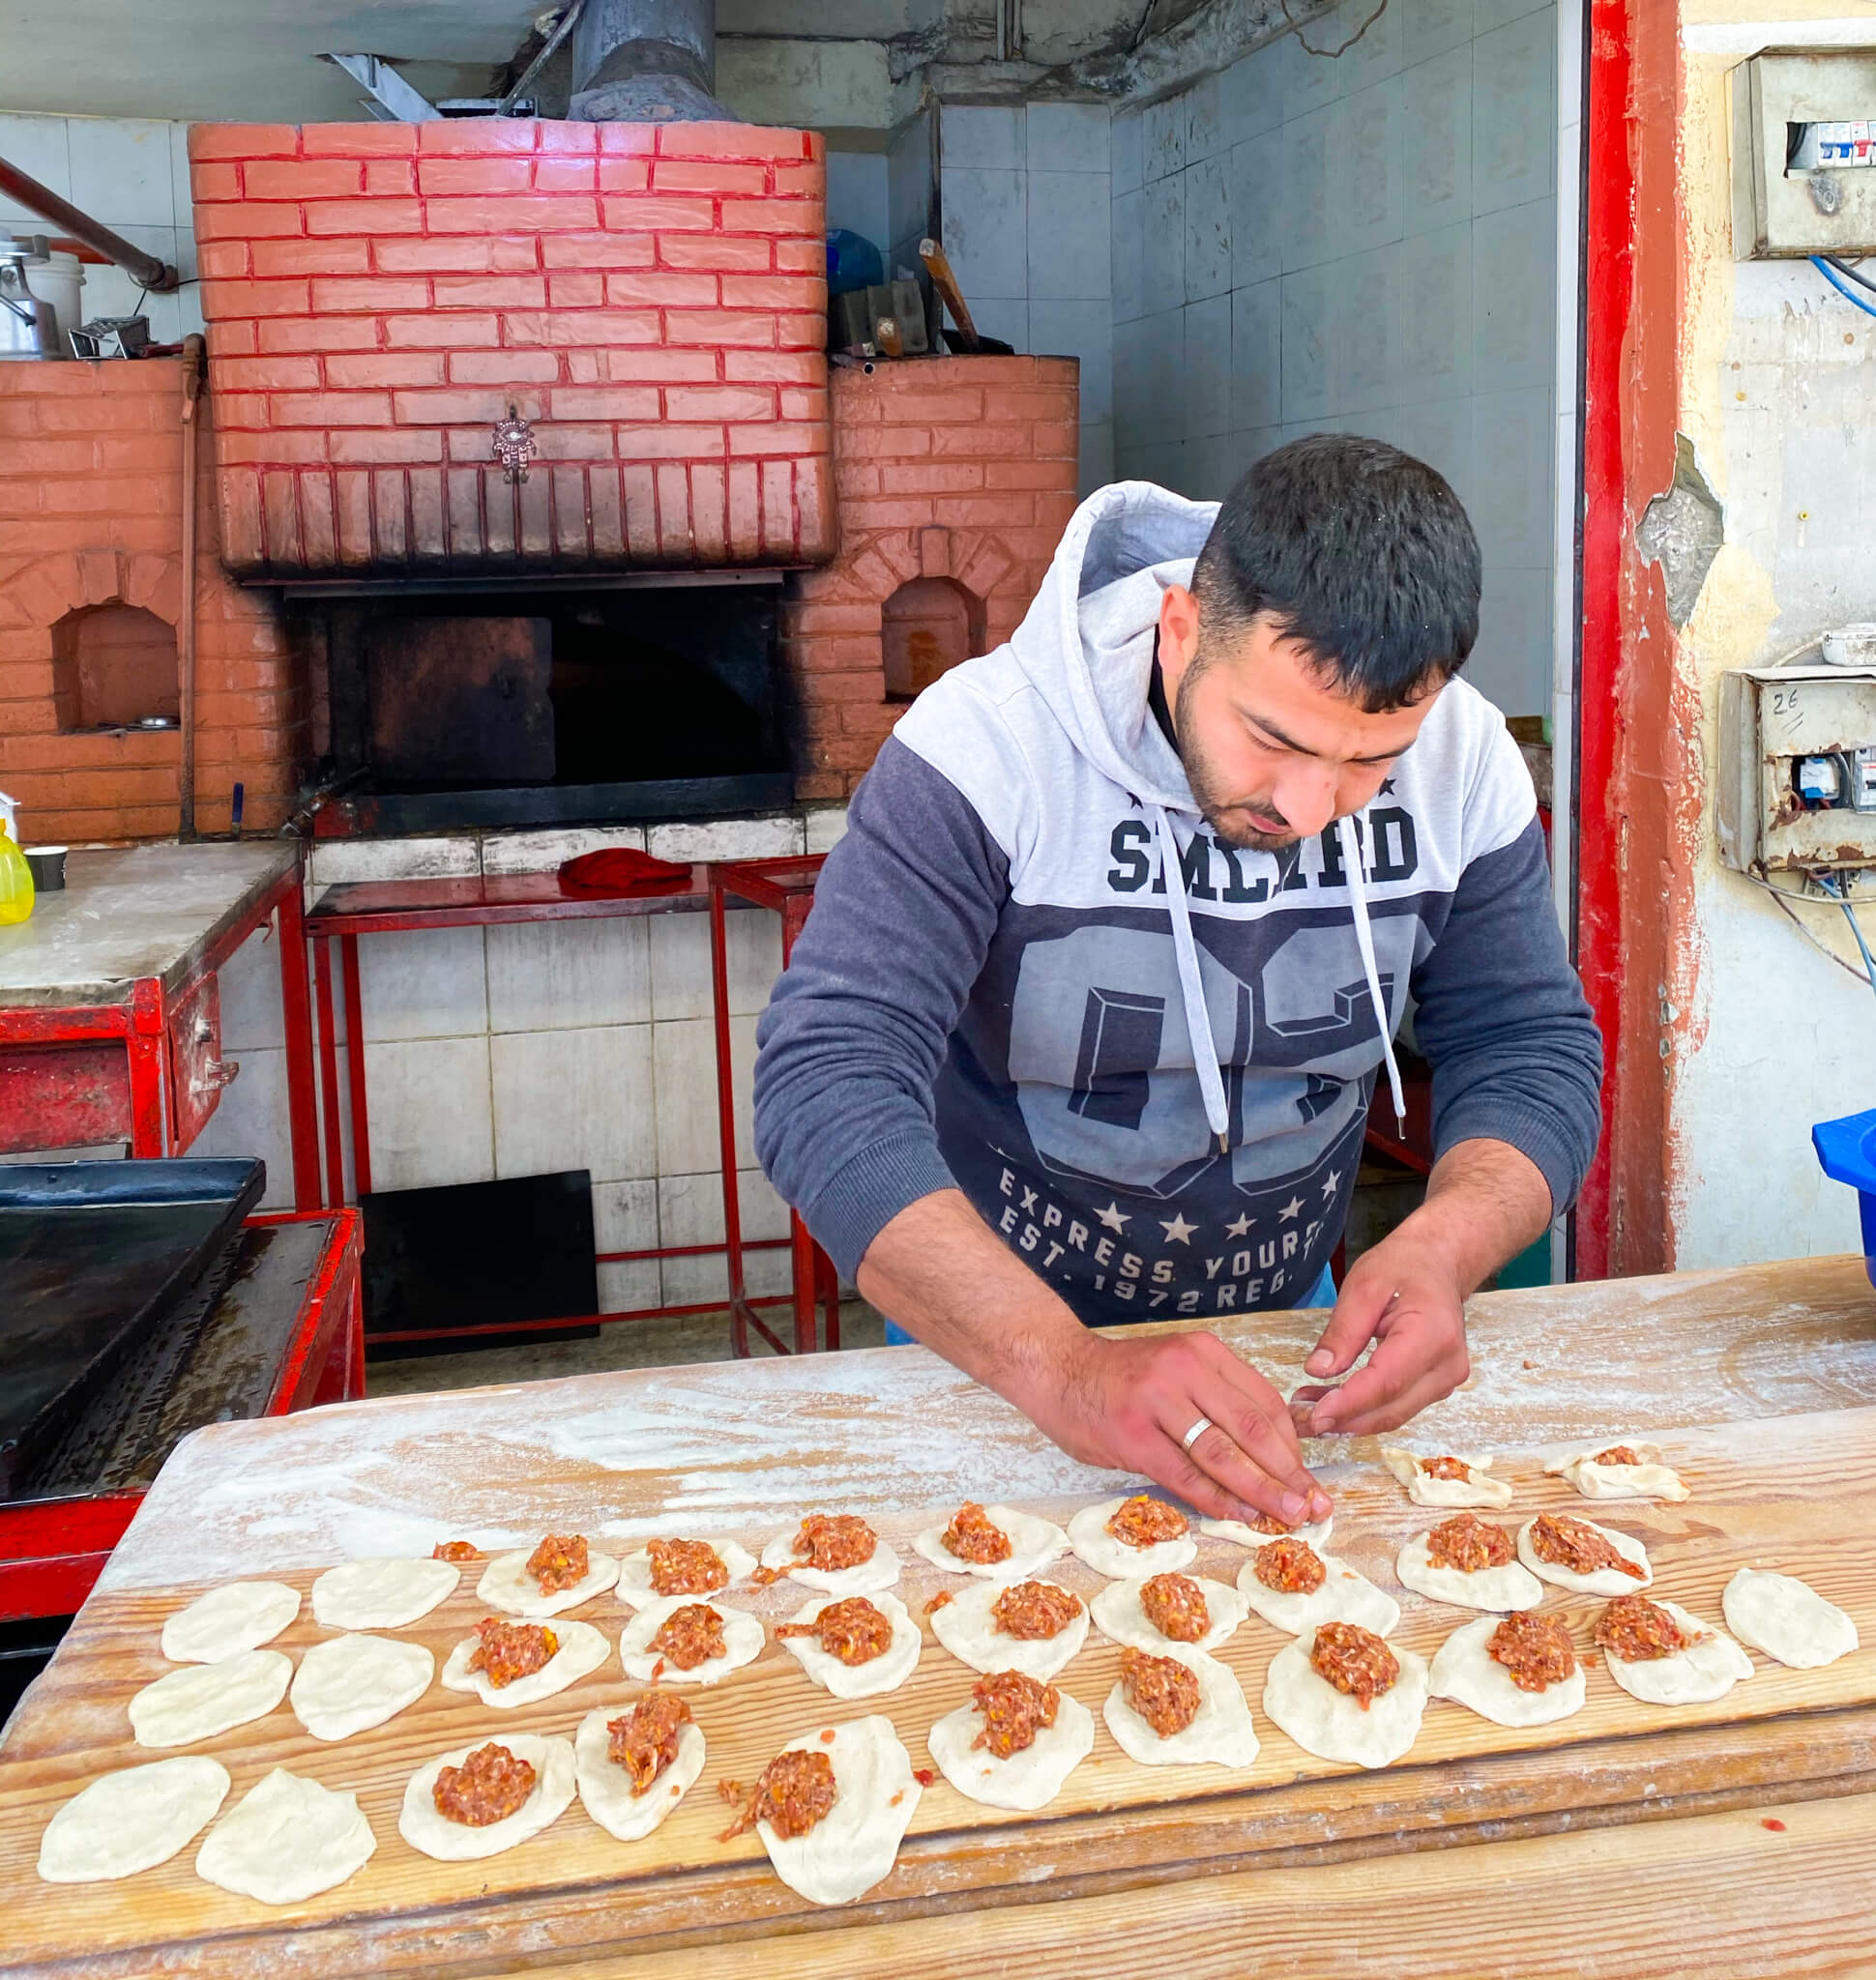 A local man filling sfiha pastries with minced meat in front of a brick oven on the edge of the street in Baalbek